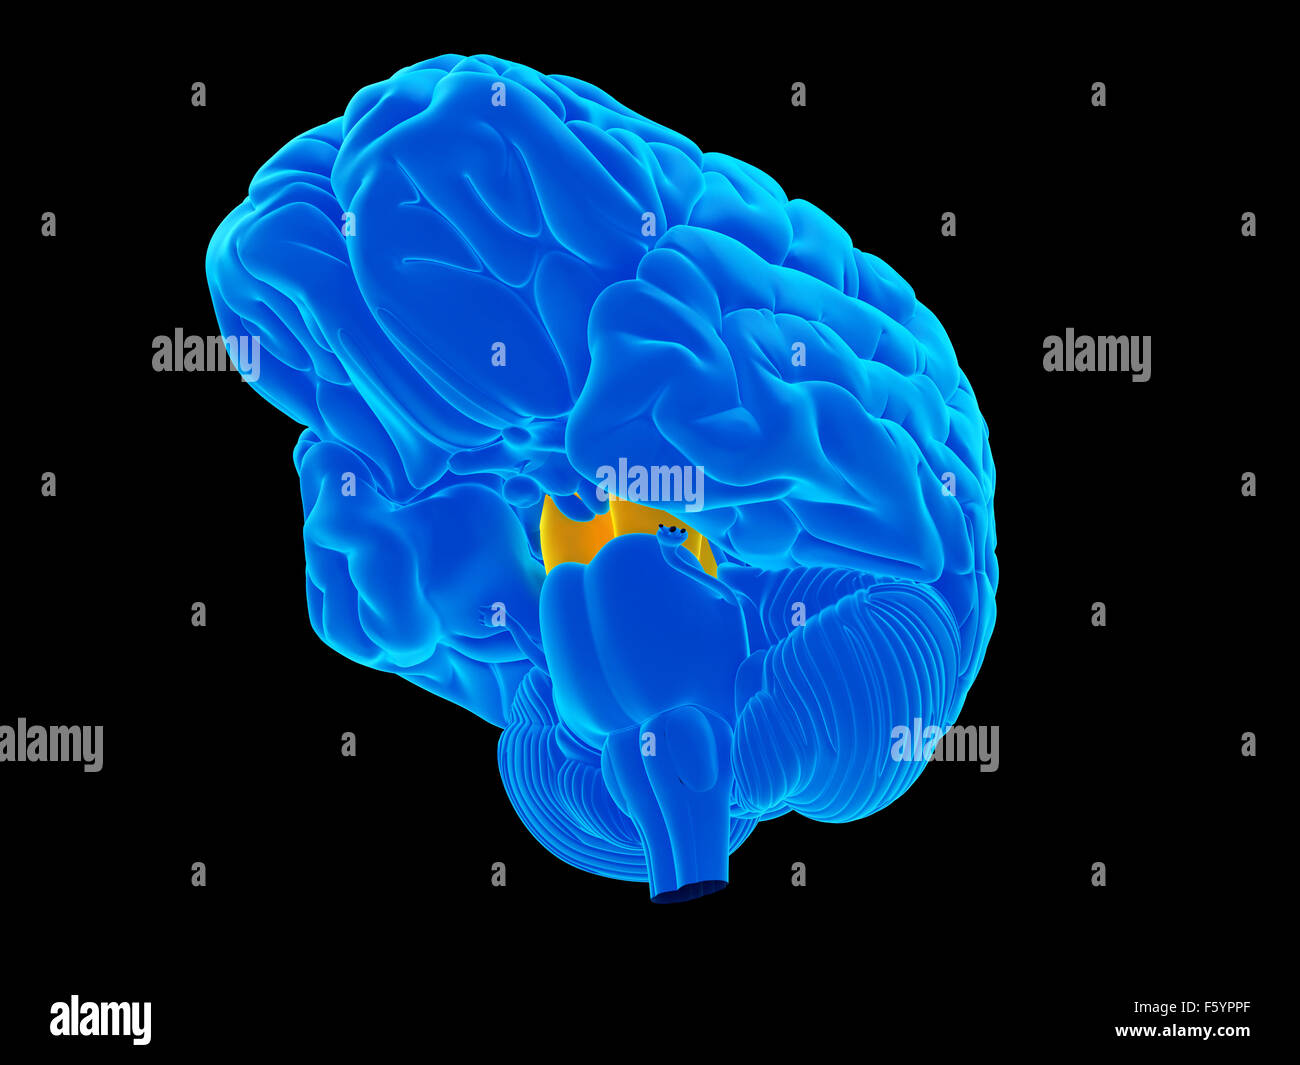 medically accurate illustration of the cerebral peduncle Stock Photo